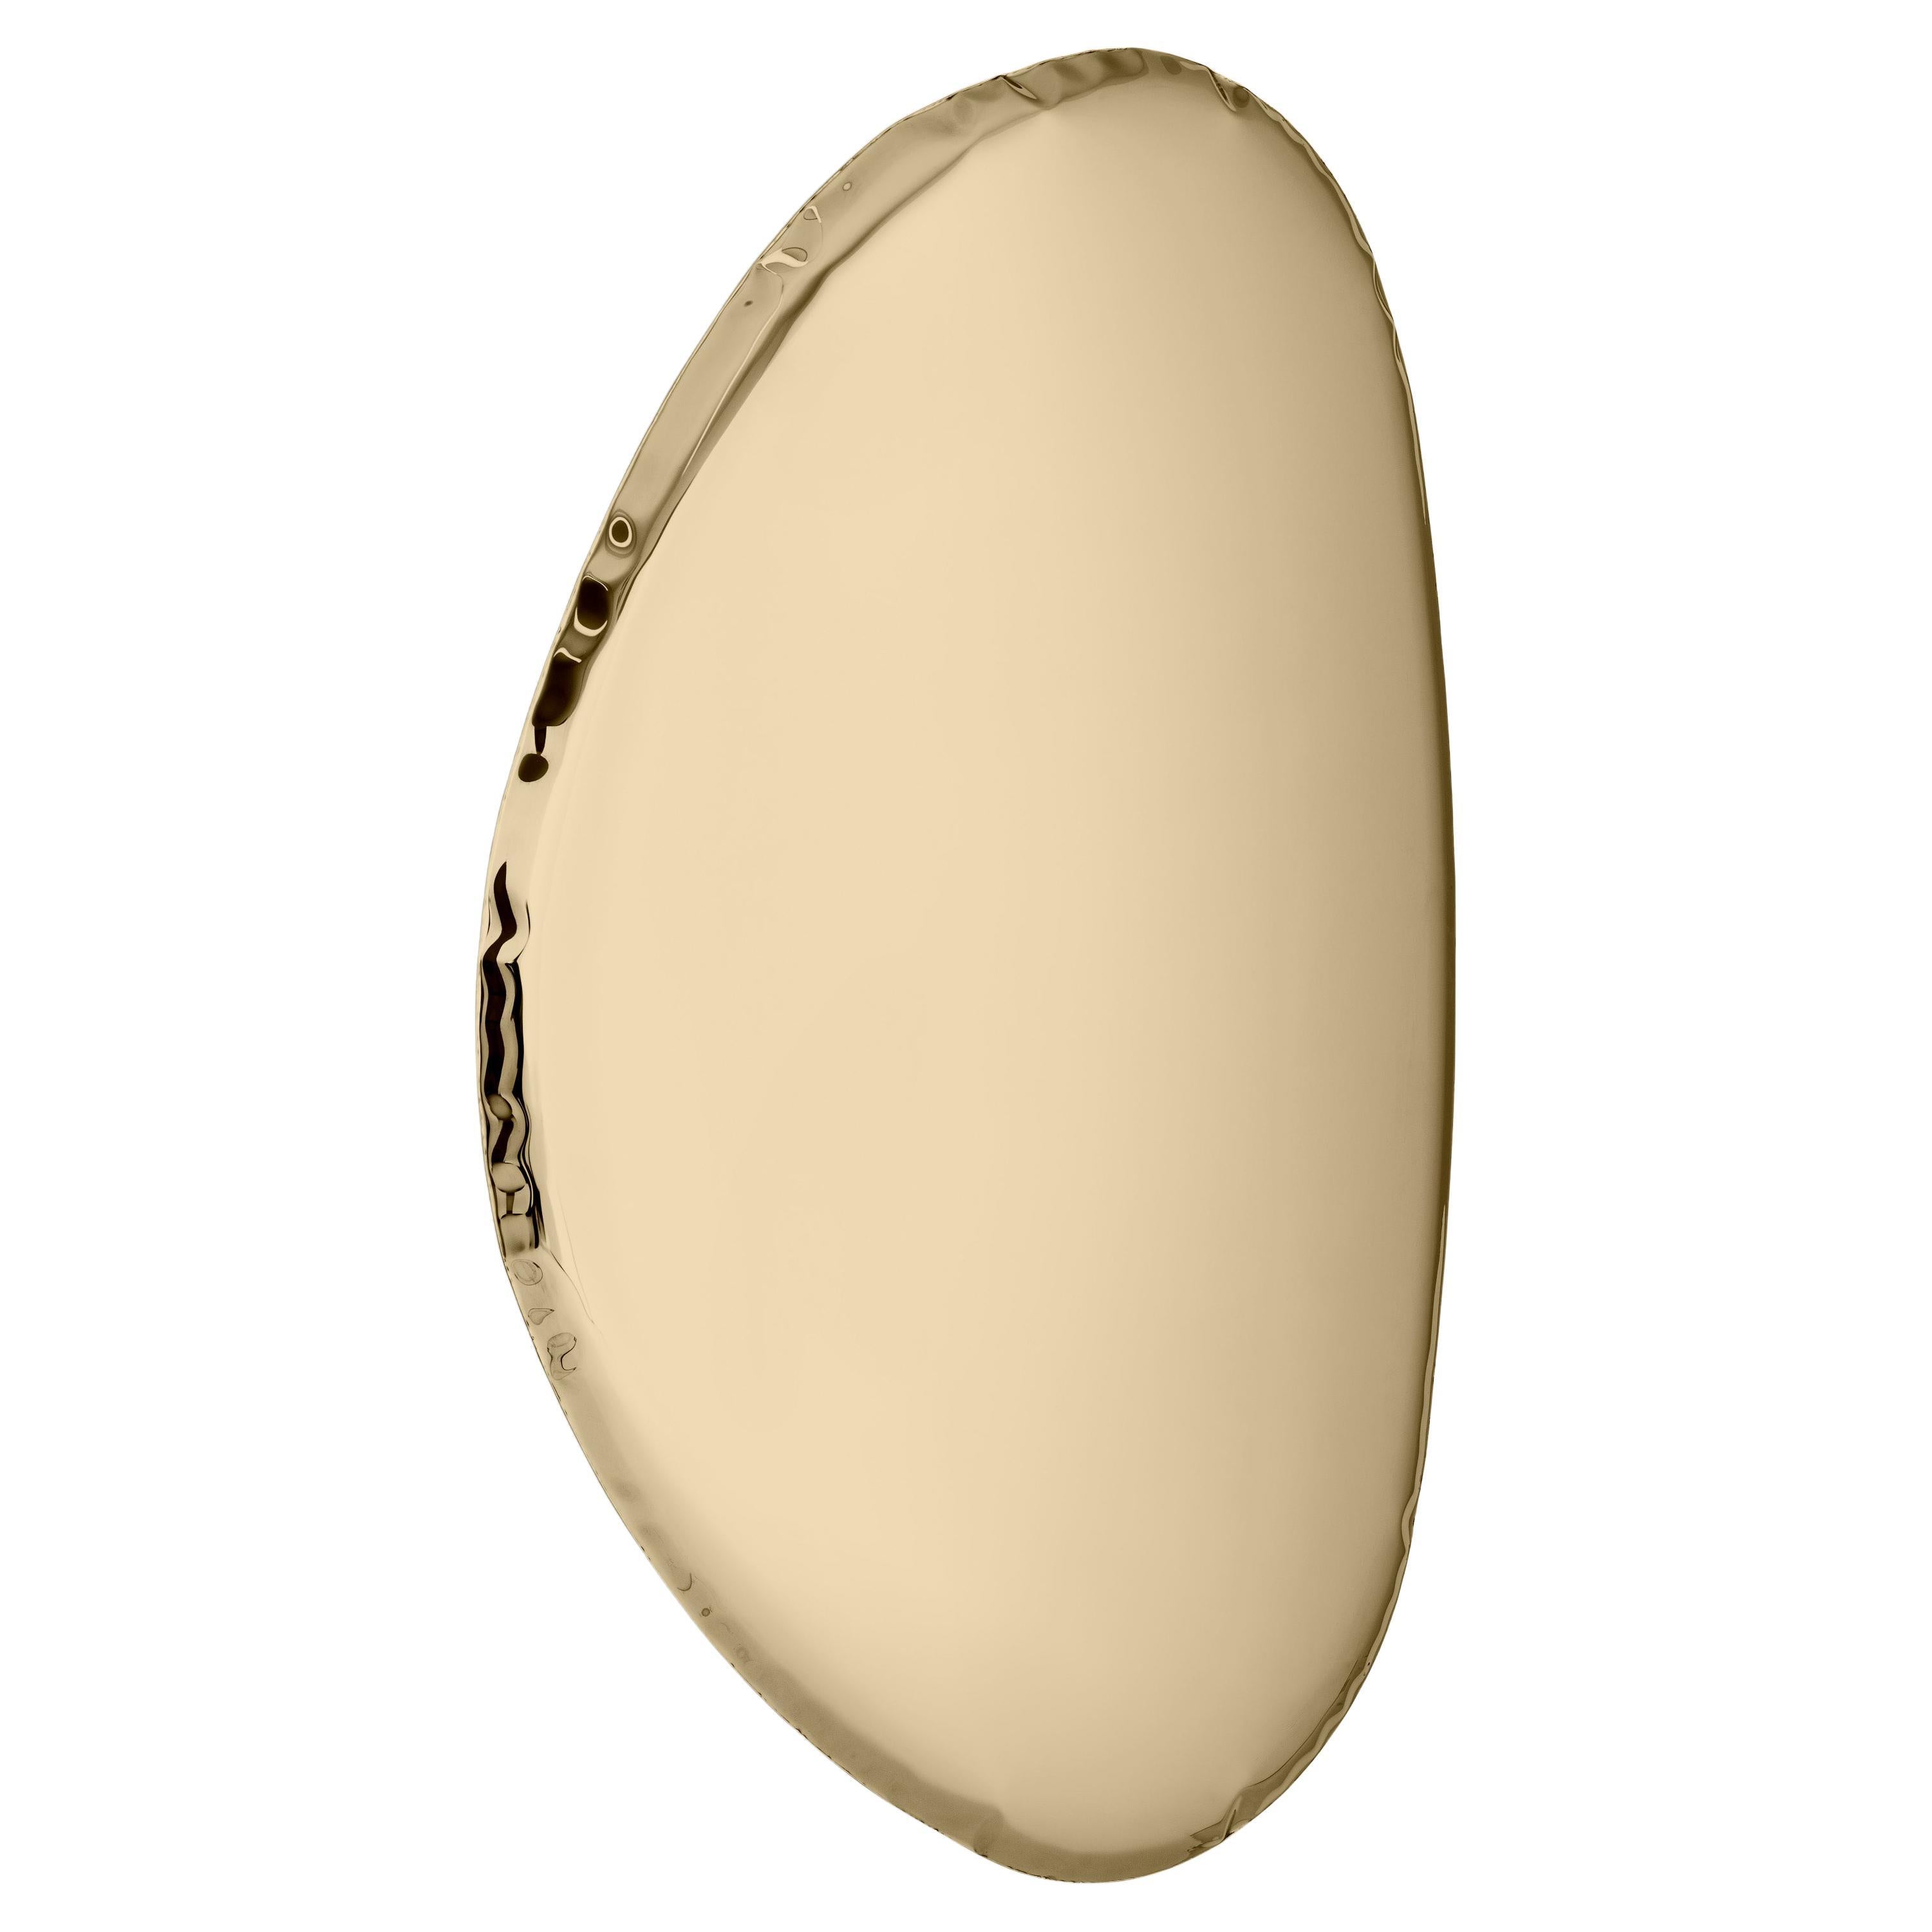 Tafla O2 Polished Stainless Steel Classic Gold Color Wall Mirror by Zieta